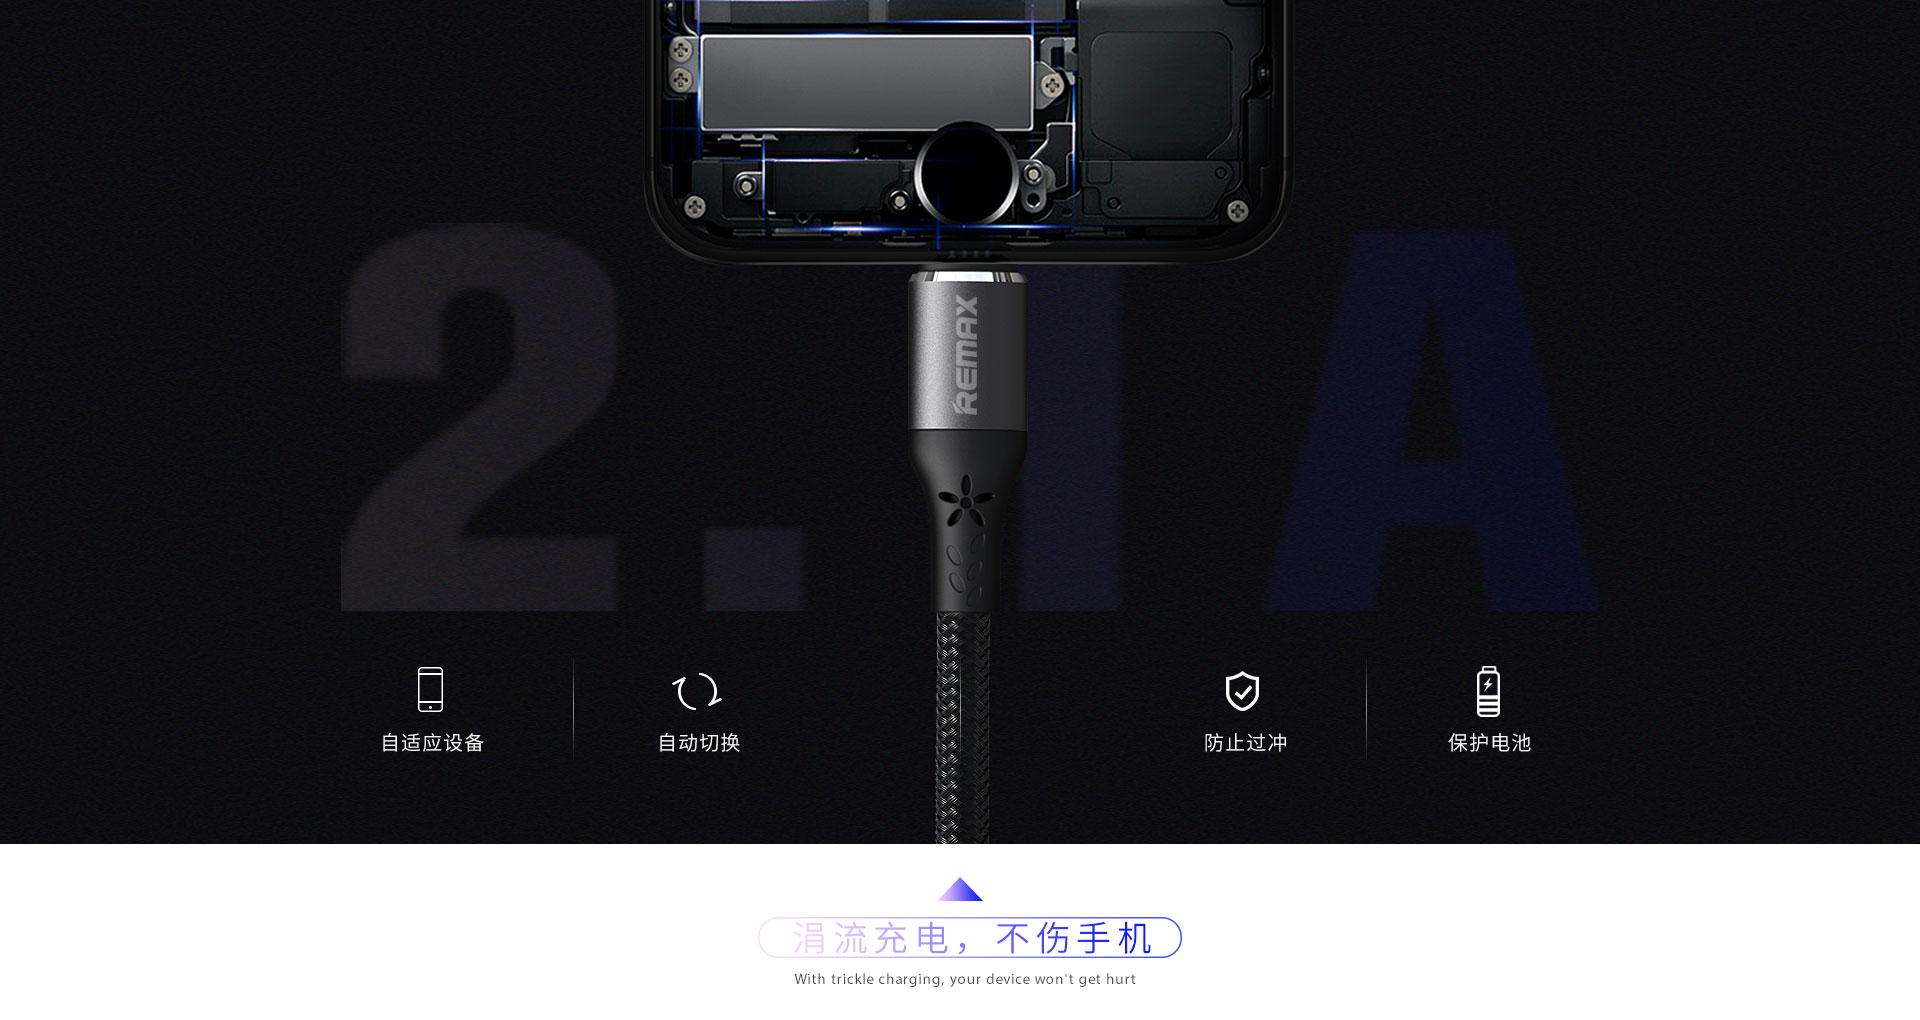 Remax-Original-RC-133i-Voice-Control-LED-Light-Flash-Cable-Fast-Data-Charging-USB-21A-1M-Cable-For-Lightning-iPhone-600710307_MY-1223622339